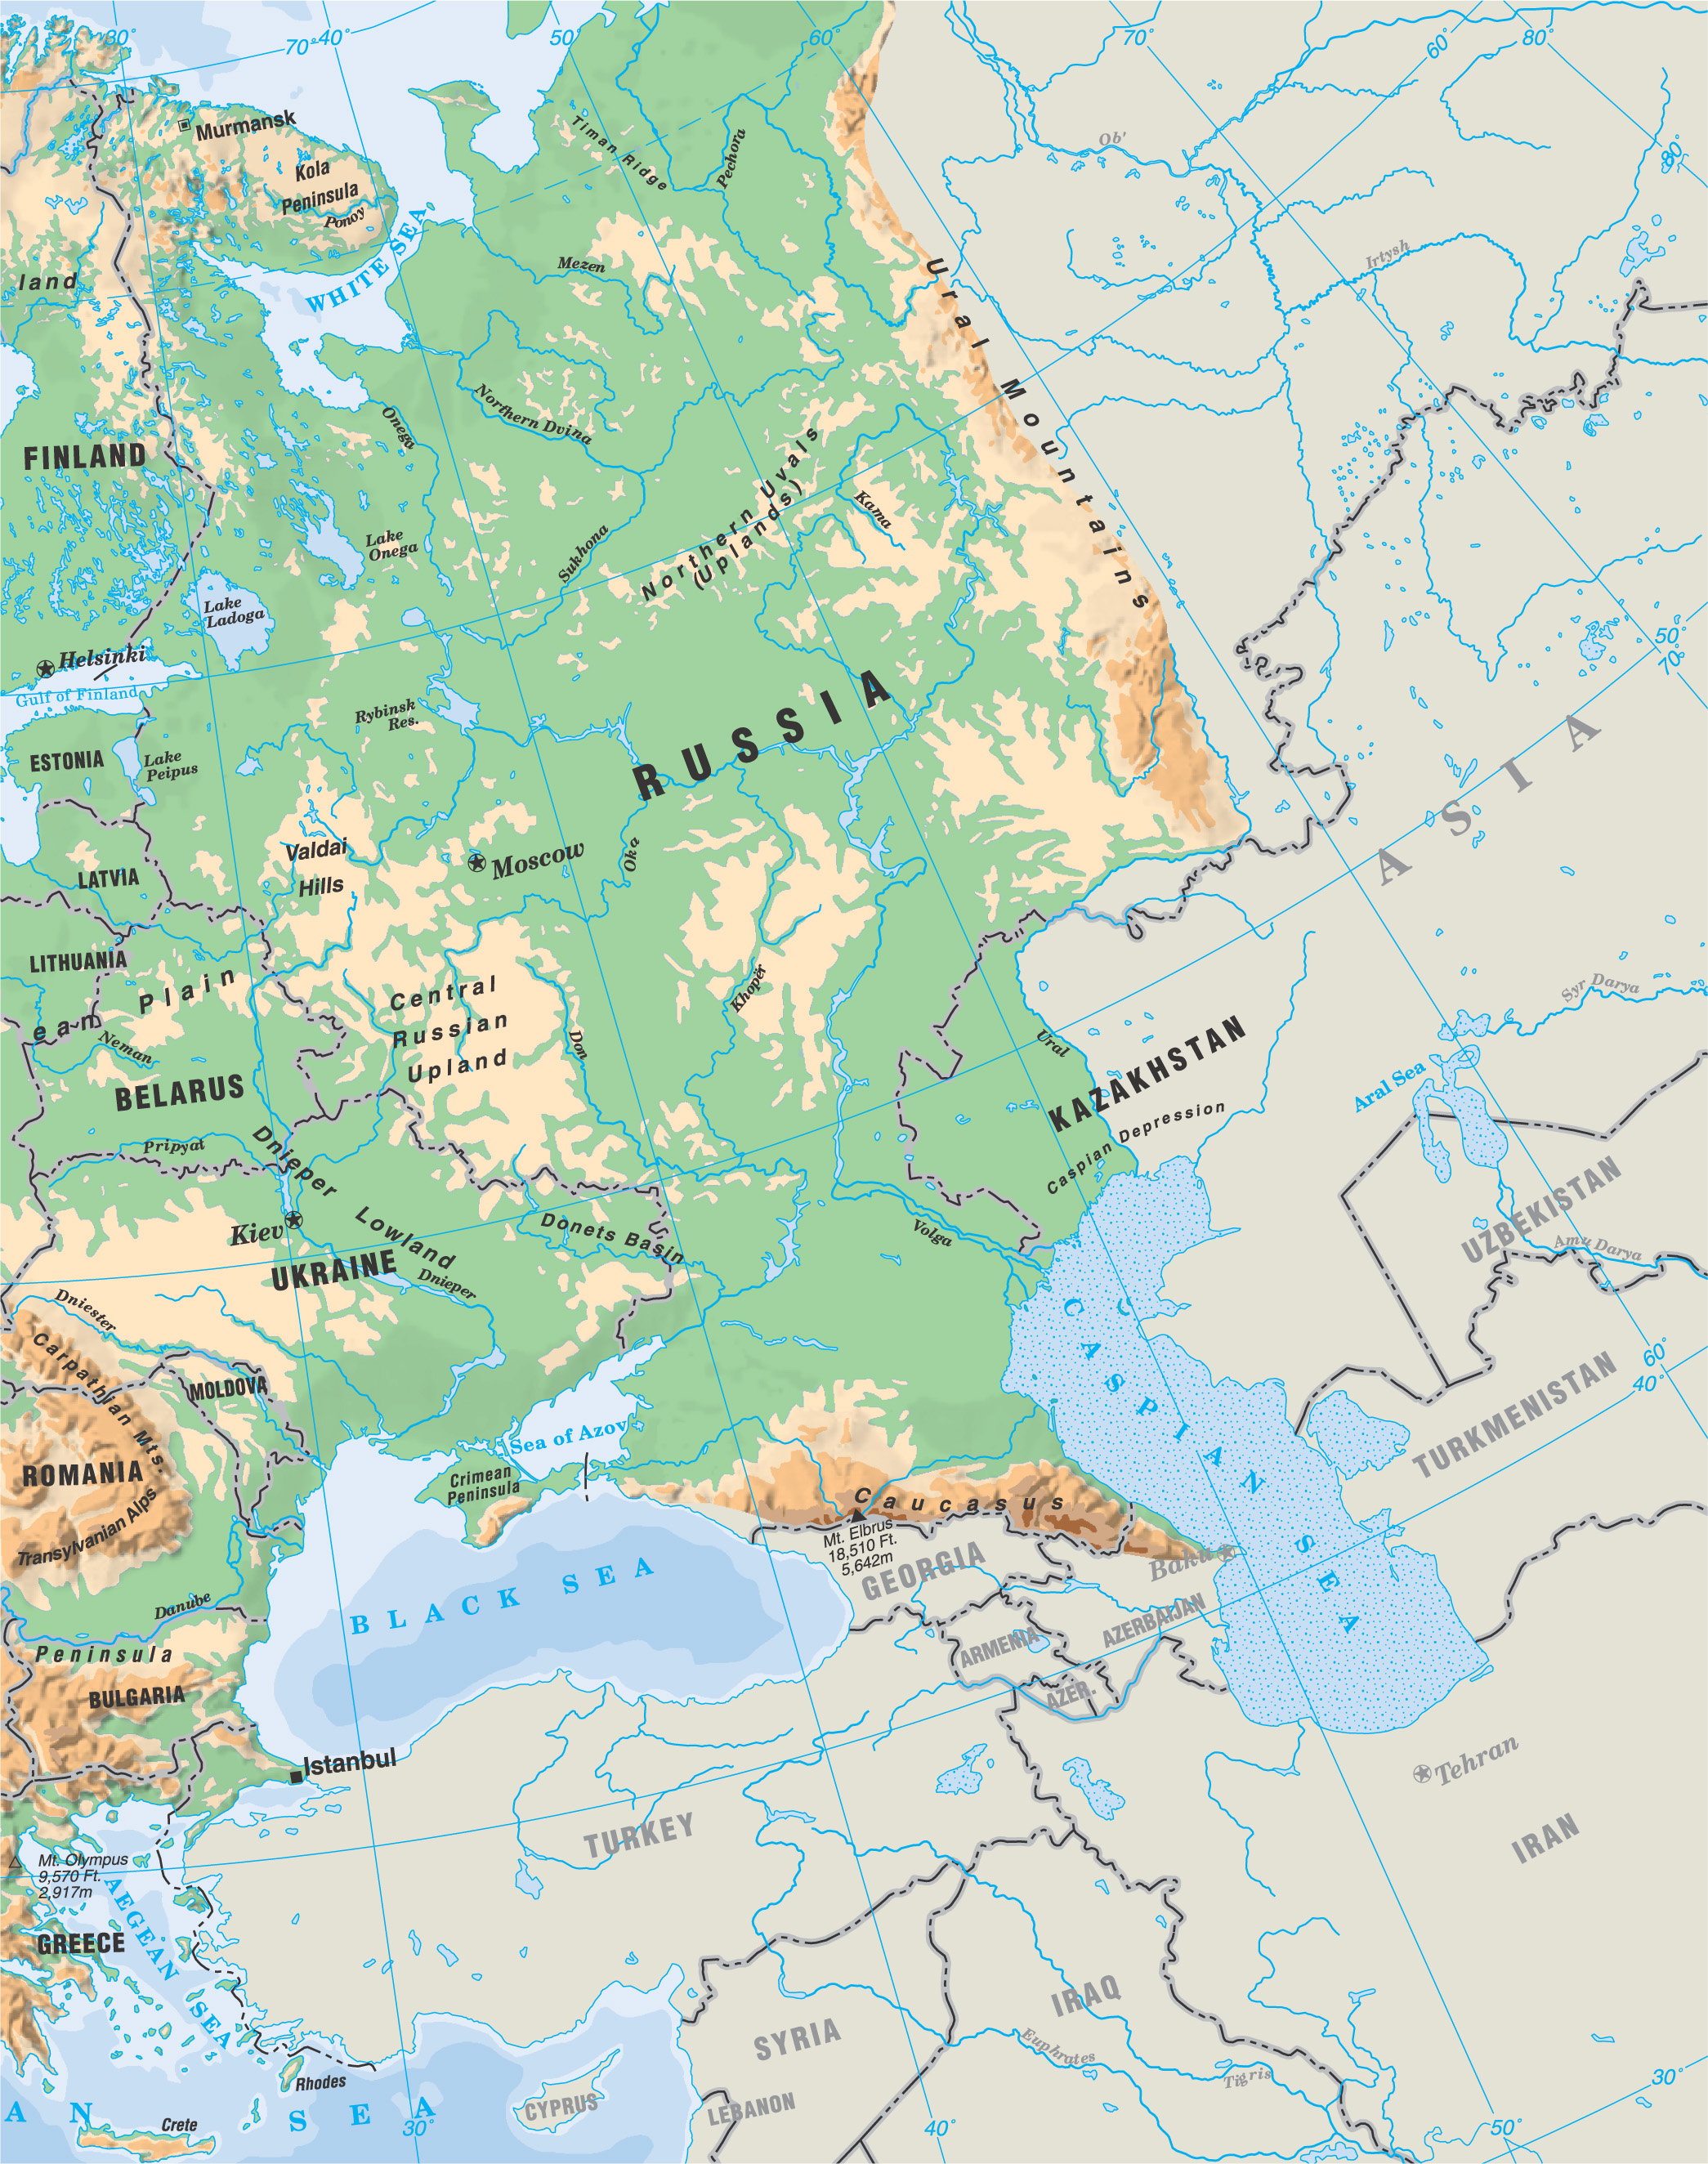 physical map of Europe: mountains, plains, rivers, etc are shaded with different colors